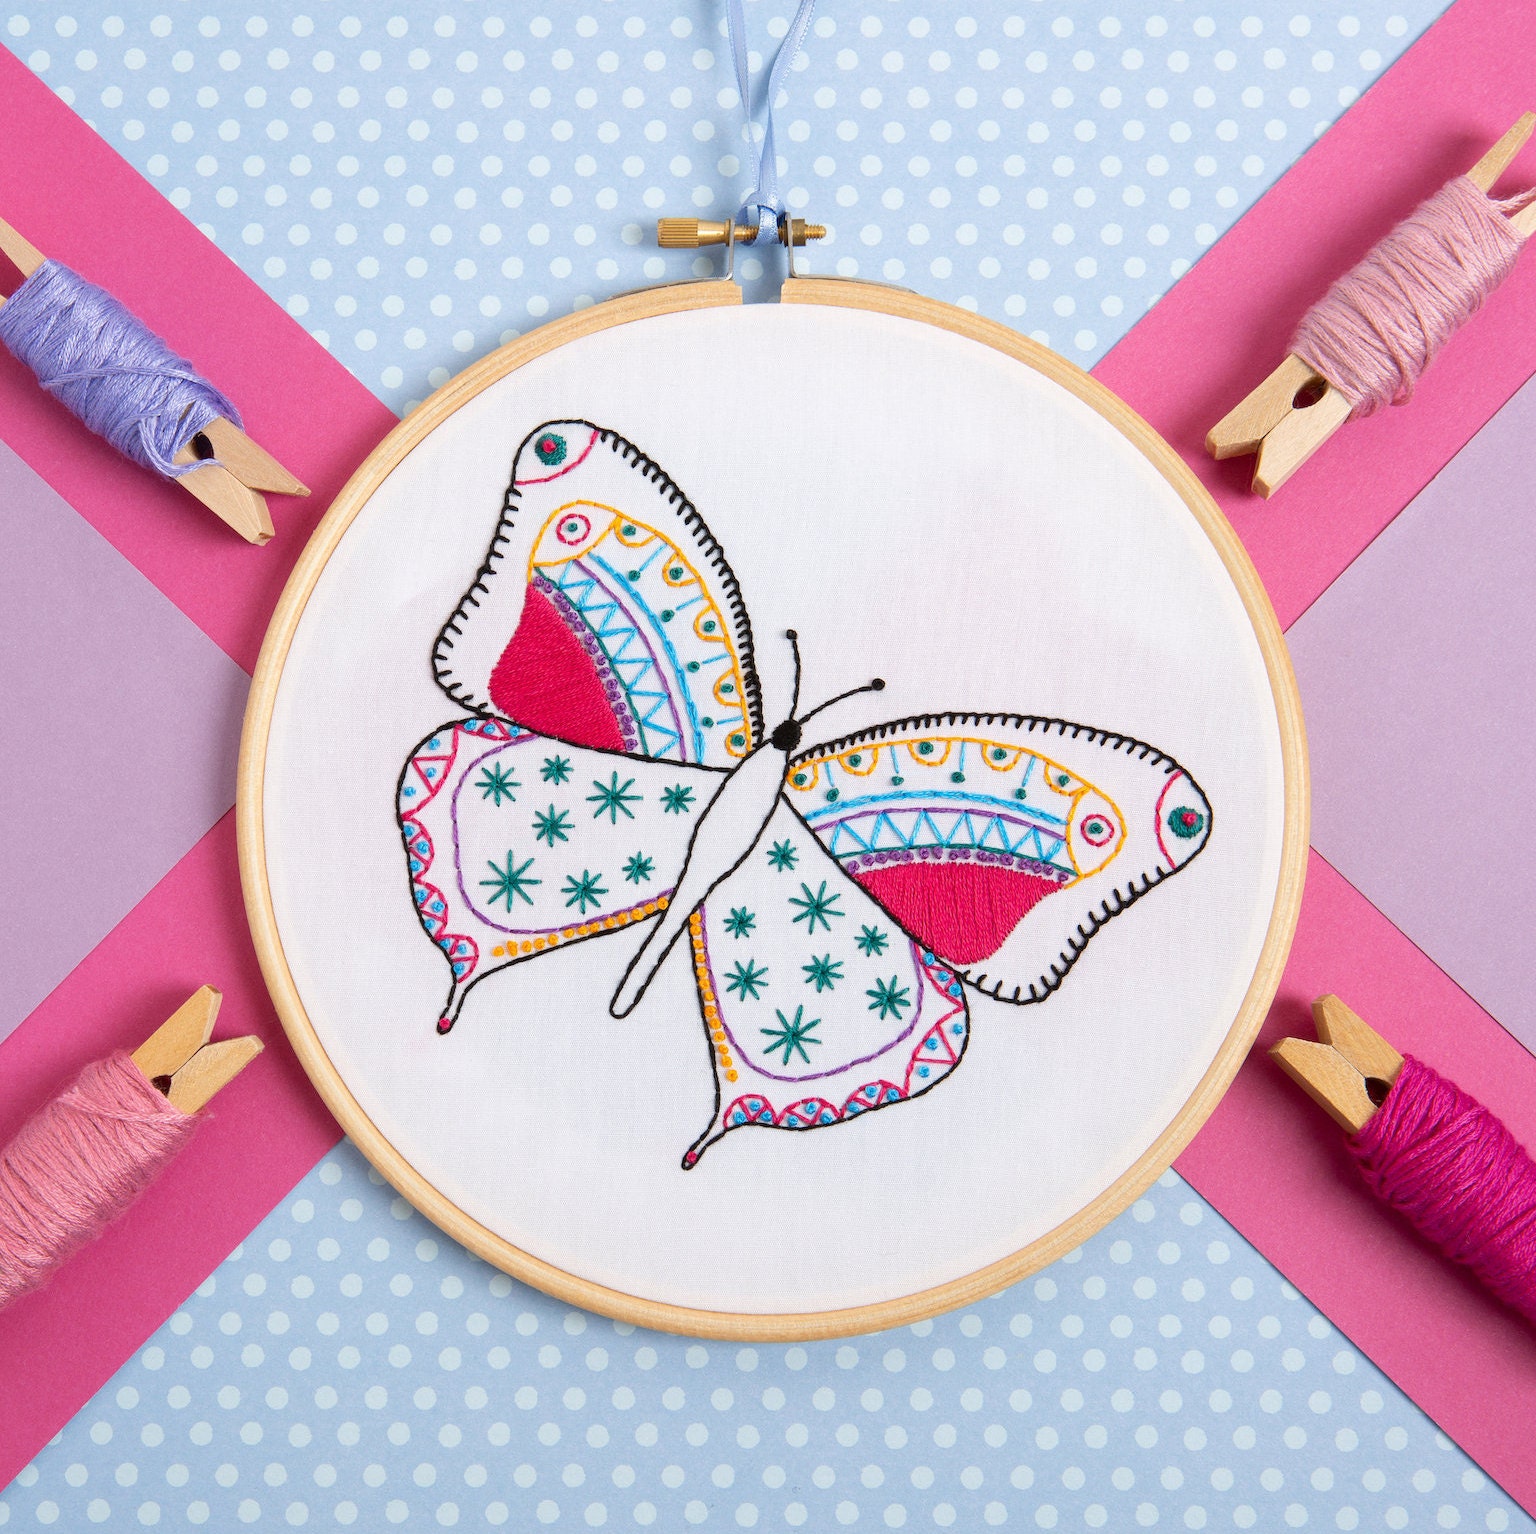 Embroidery Kit for Beginners 'Butterfly' - Fun Starter Kit for Hand Embroidery with Stamped Pattern, Pre-Sorted Floss and Bamboo Hoop - for Adults